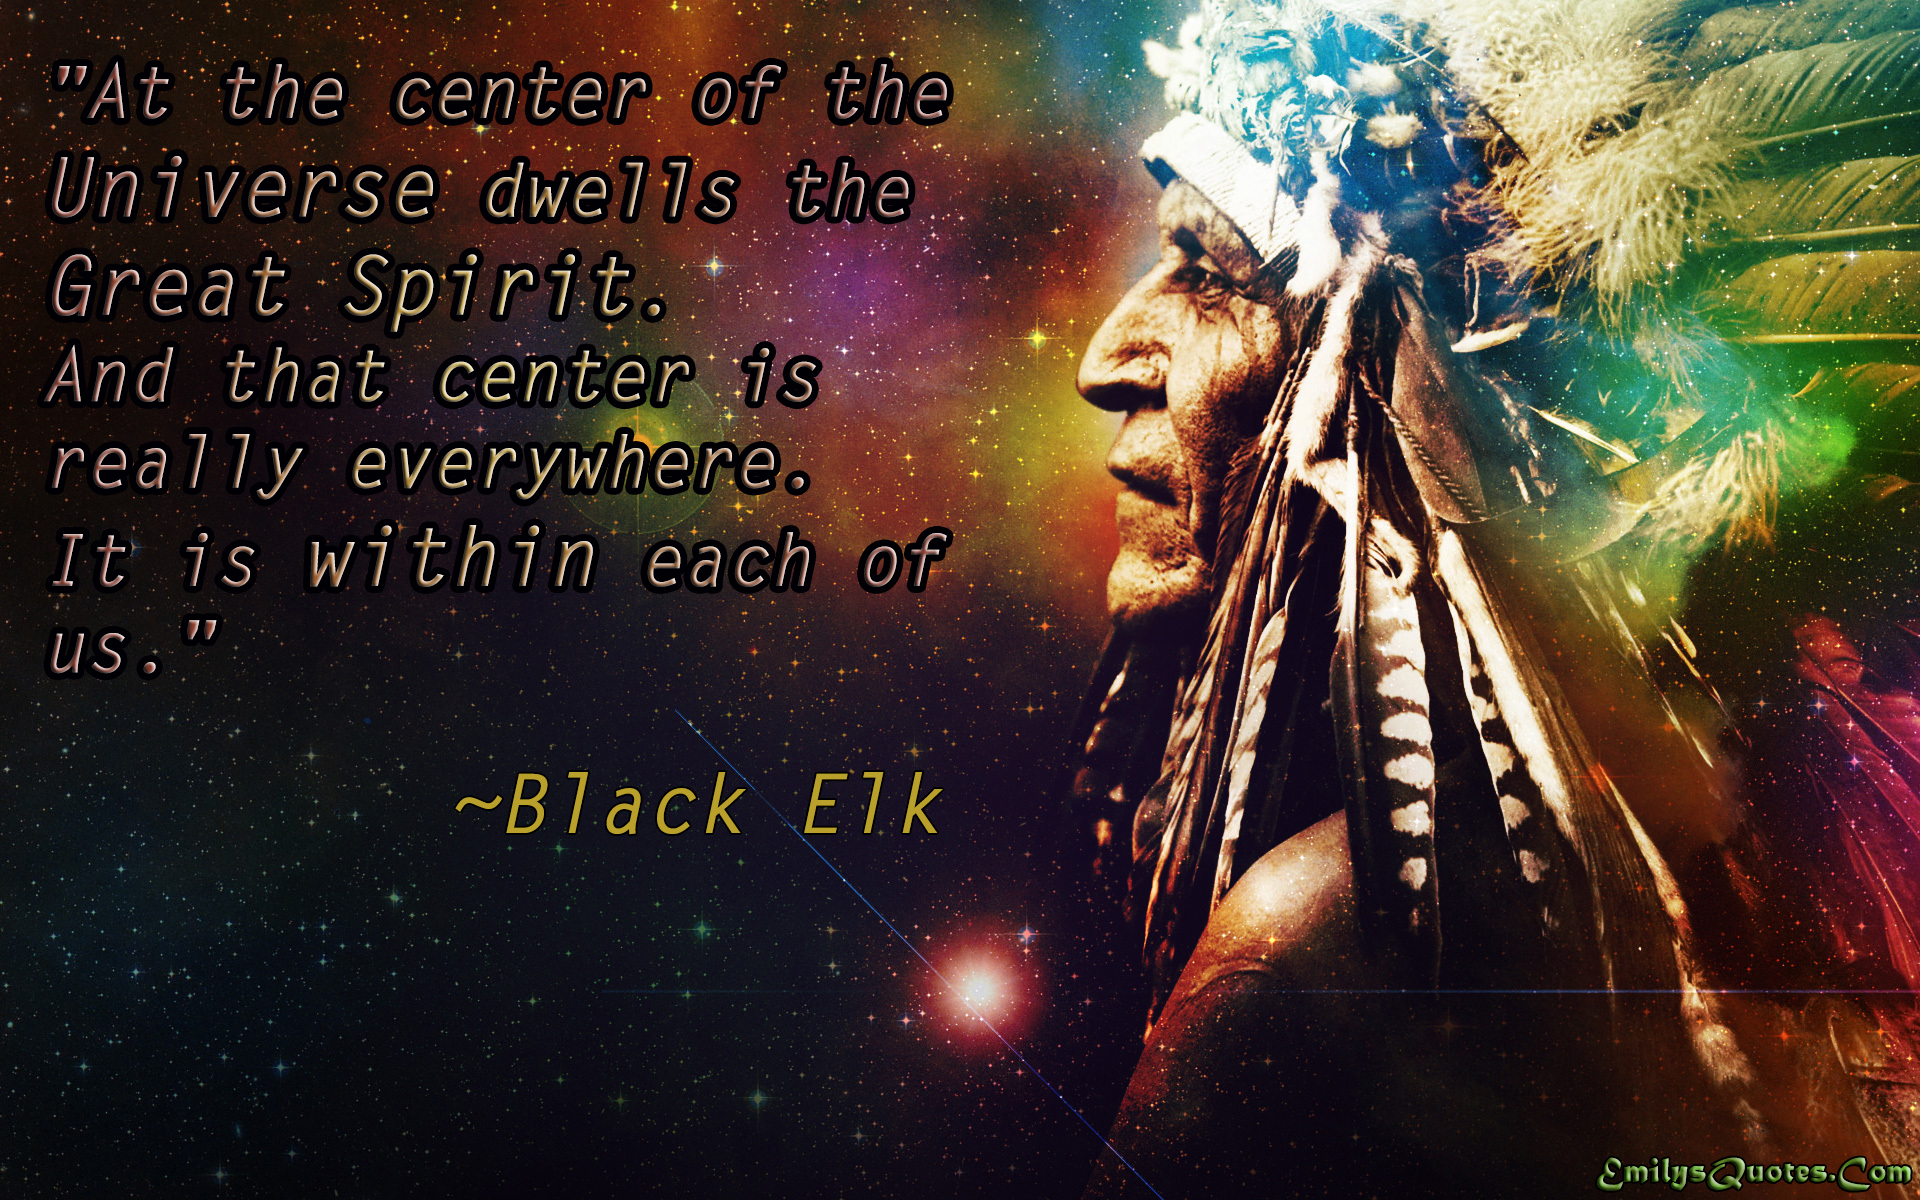 At the center of the Universe dwells the Great Spirit. And that